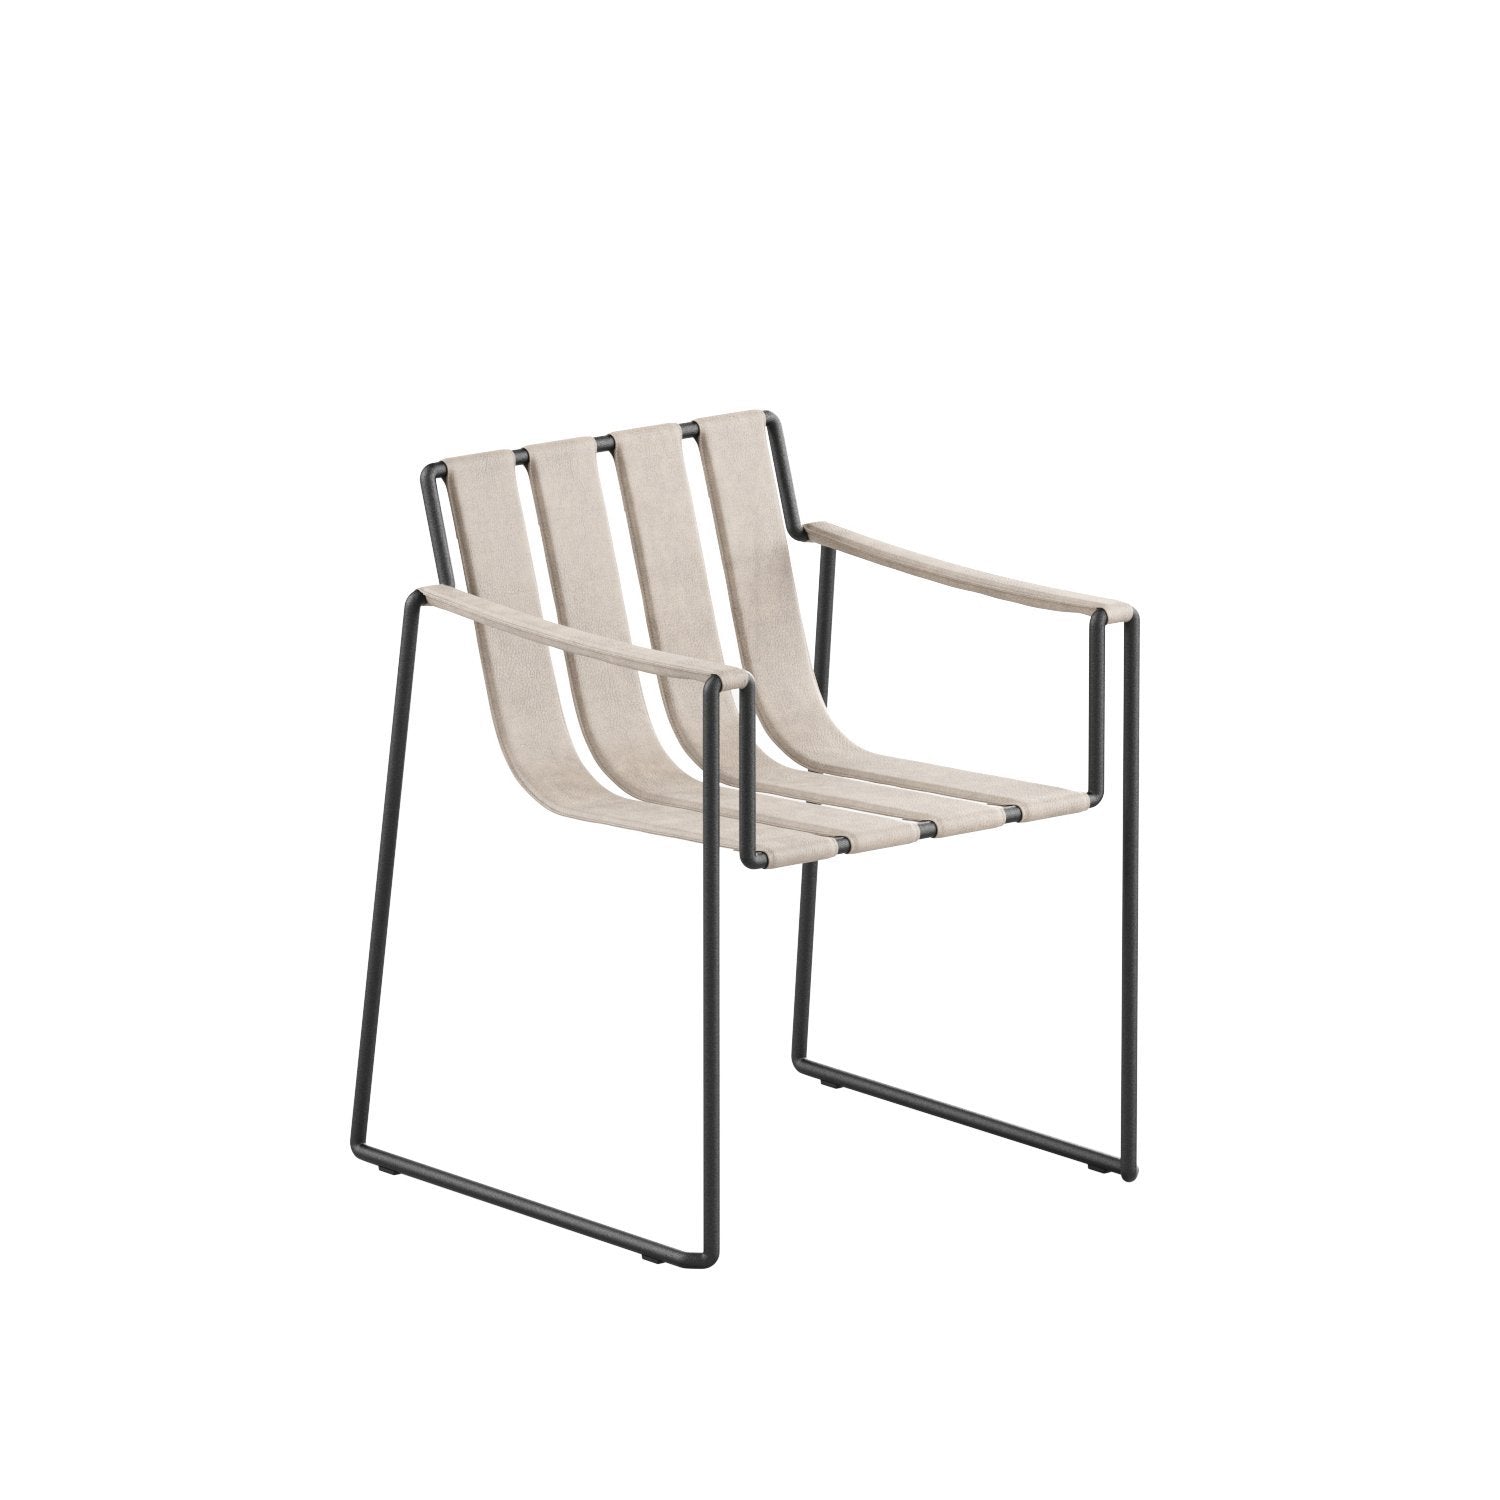 Strappy 55 chair in natural linen